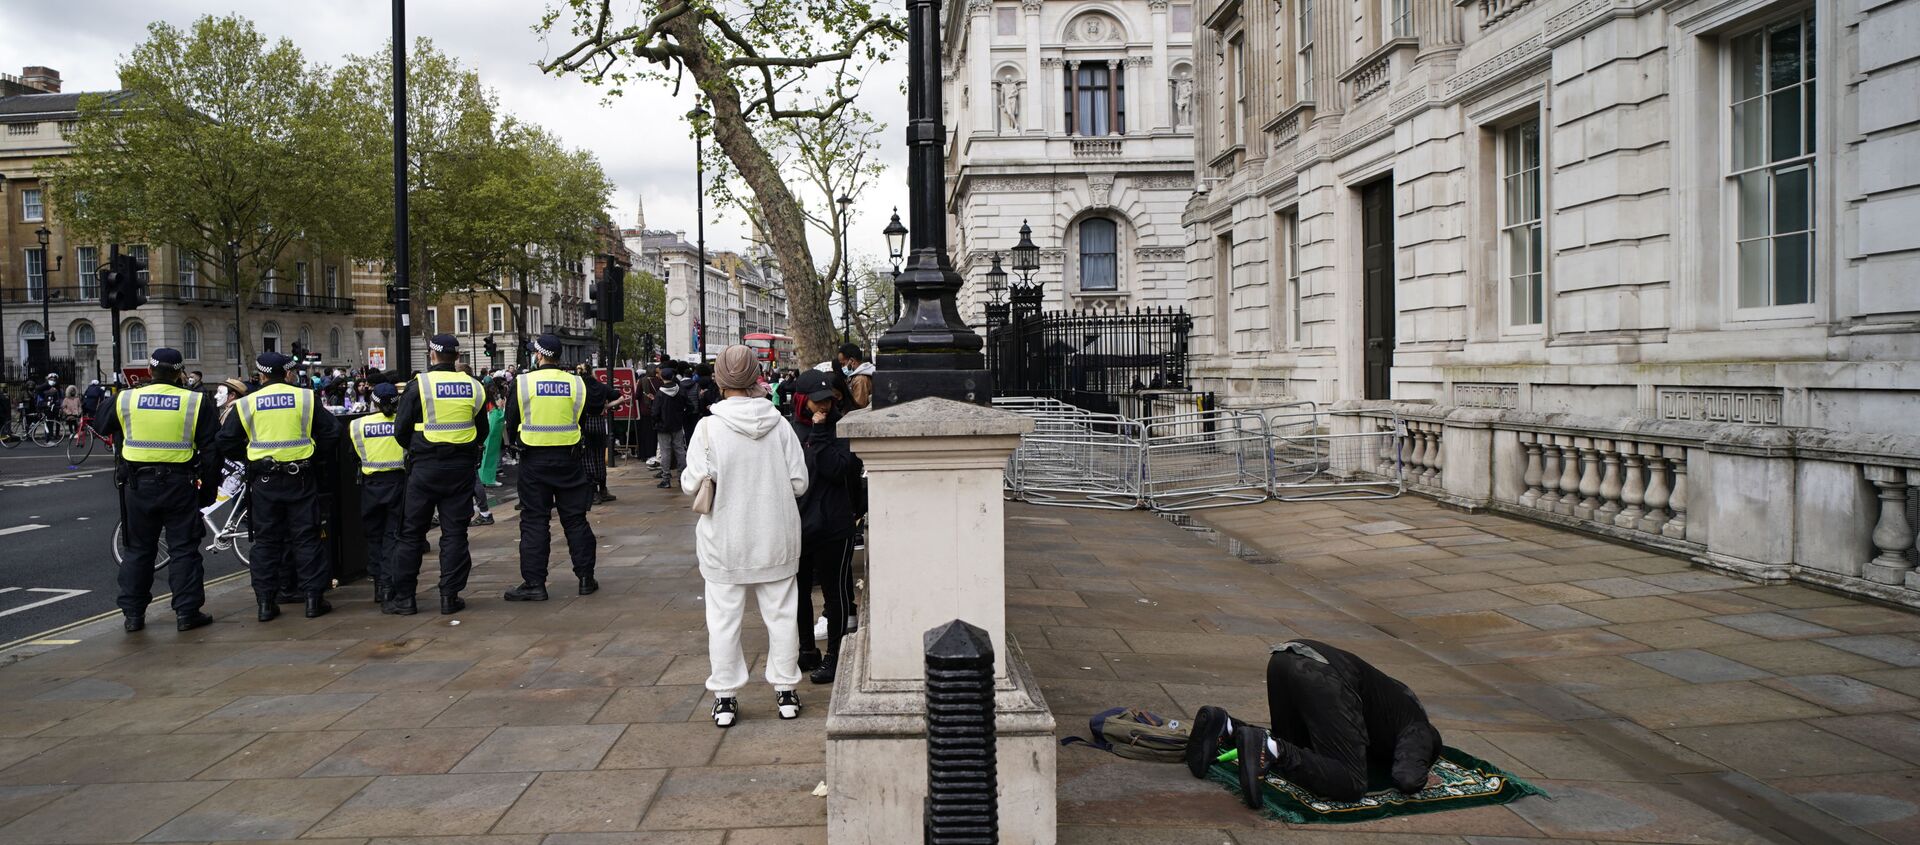 A man prays as people gather outside Downing Street to protest against Israeli attacks on Palestinians in Gaza, in London, Saturday, May 15, 2021 - Sputnik International, 1920